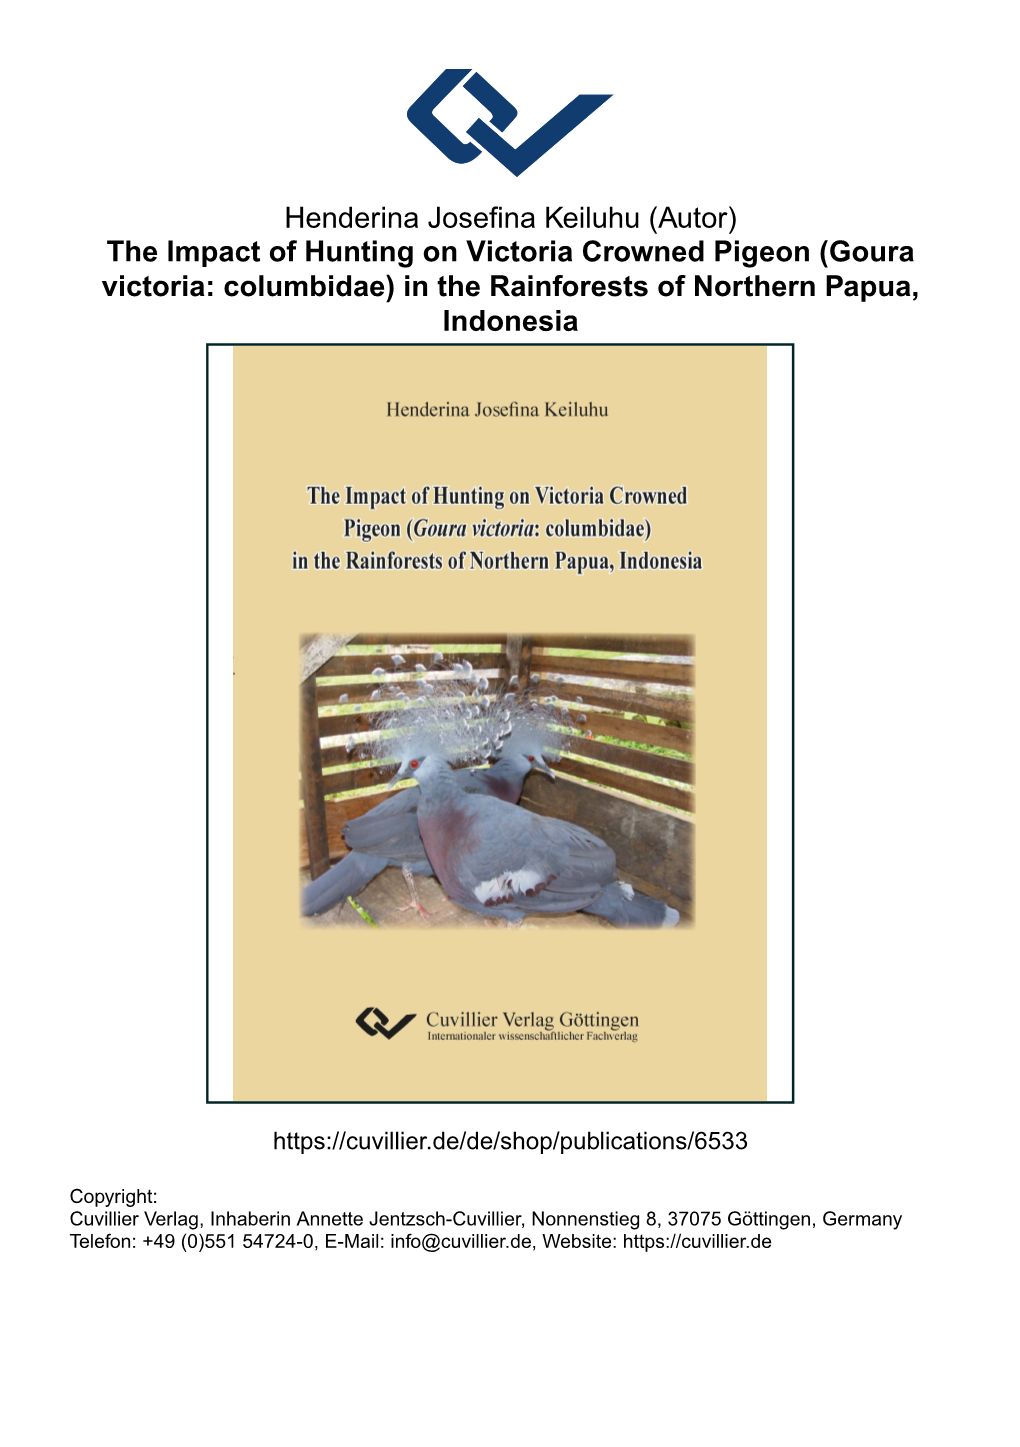 The Impact of Hunting on Victoria Crowned Pigeon (Goura Victoria: Columbidae) in the Rainforests of Northern Papua, Indonesia